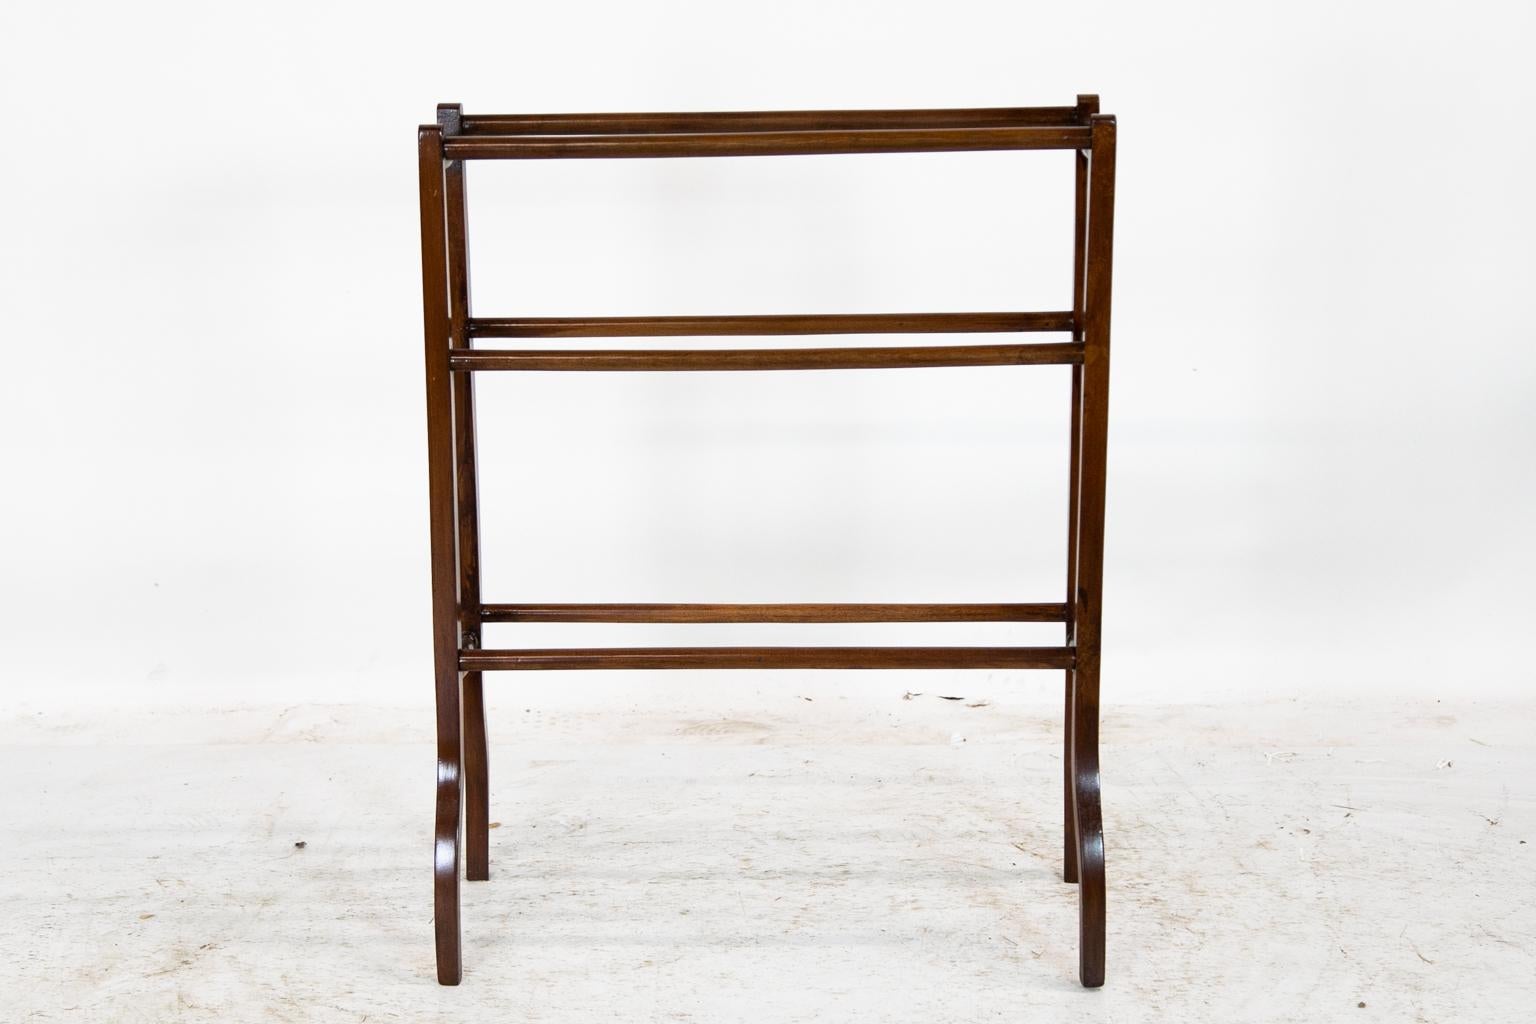 This mahogany towel/blanket rack has six hanging bars. The legs are connected by turned cross supports that terminate in legs that splay out at the foot for added stability.